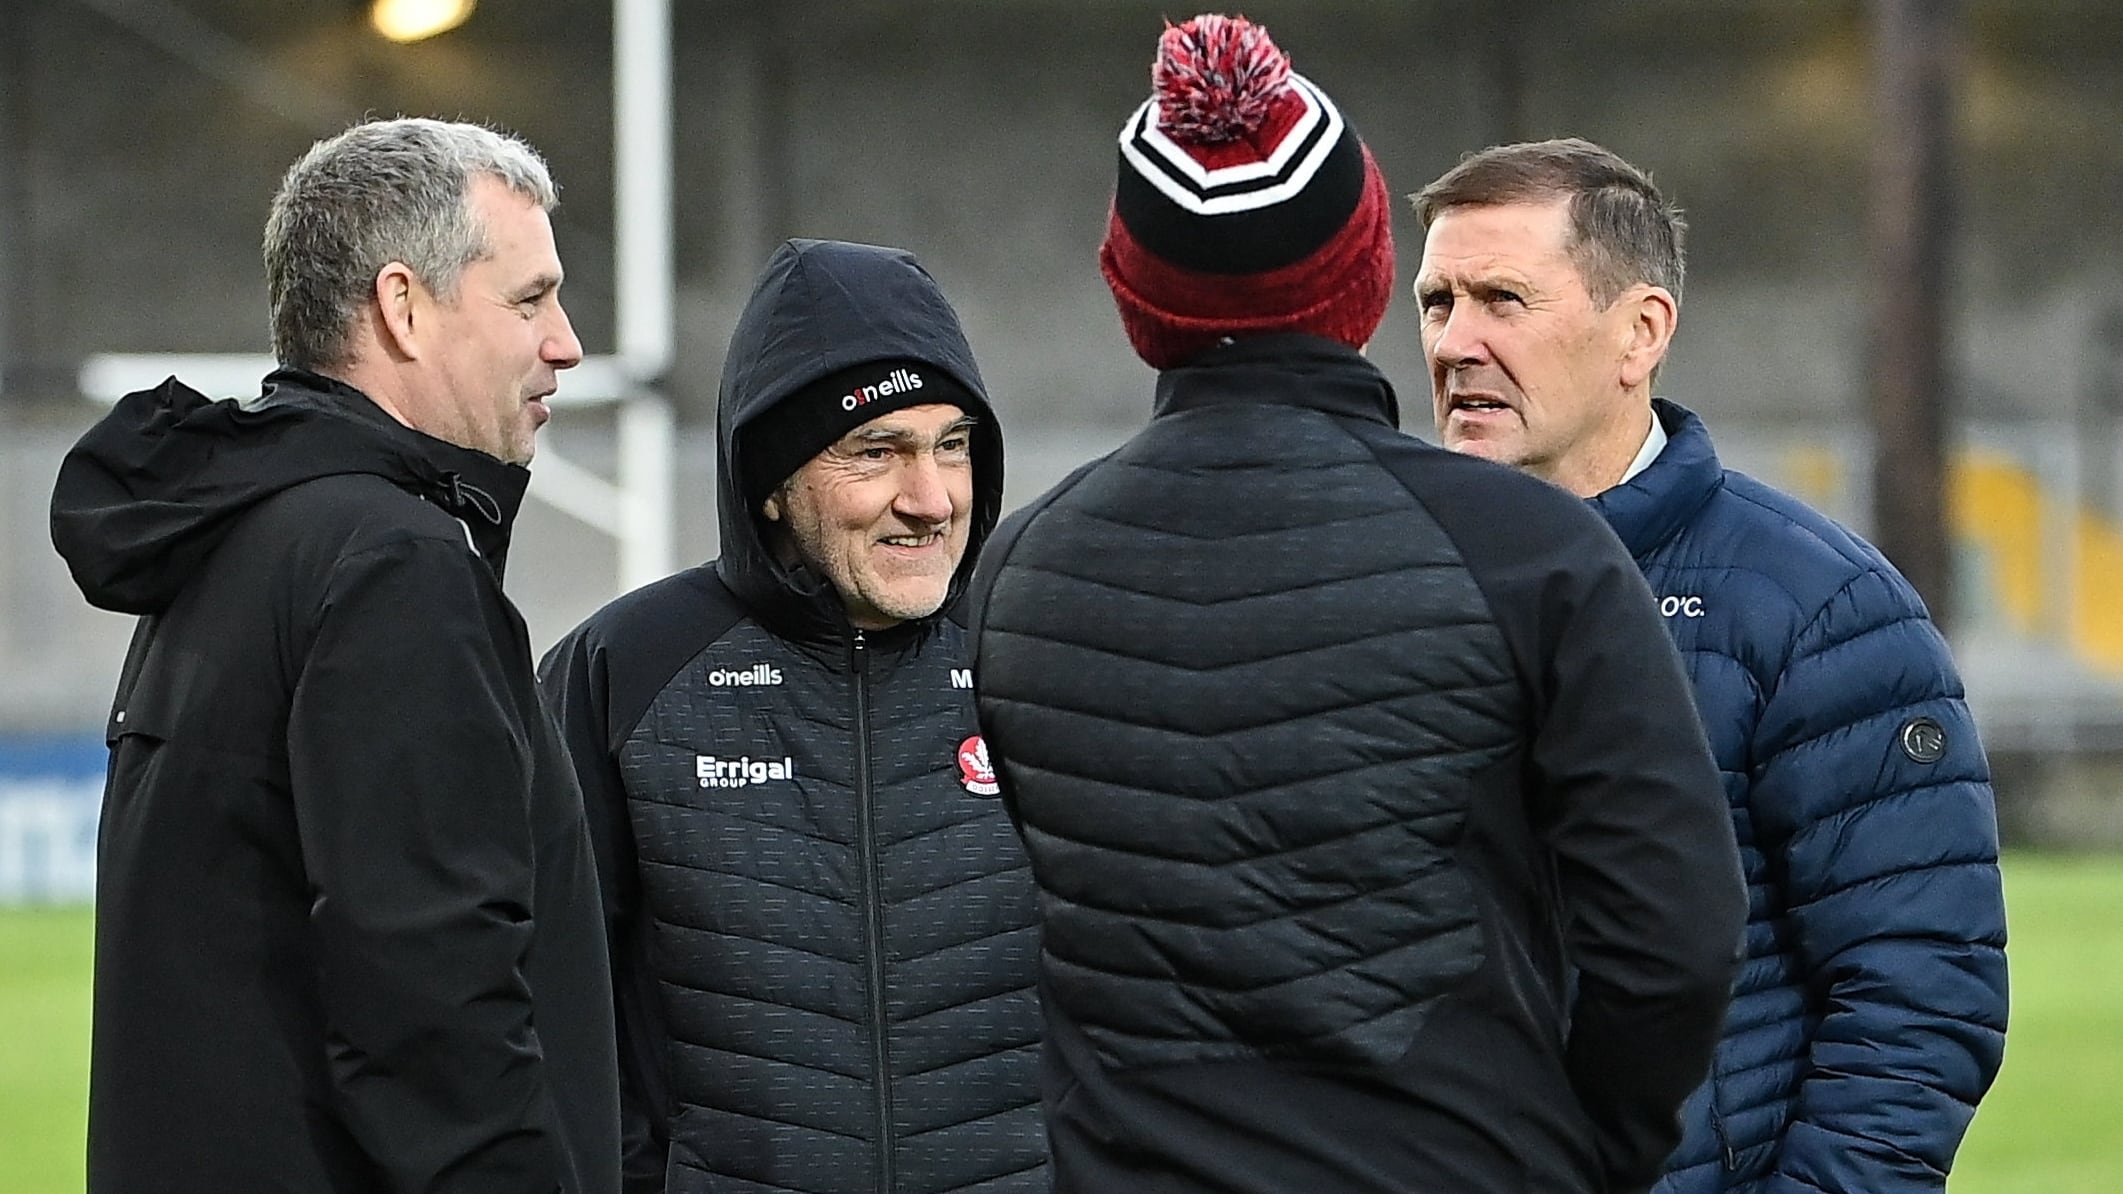 Mickey Harte and Jack O'Connor, pictured chatting after January's League meeting between Derry and Kerry in Tralee, will do Championship battle once more on Sunday. Picture by Brendan Moran/Sportsfile